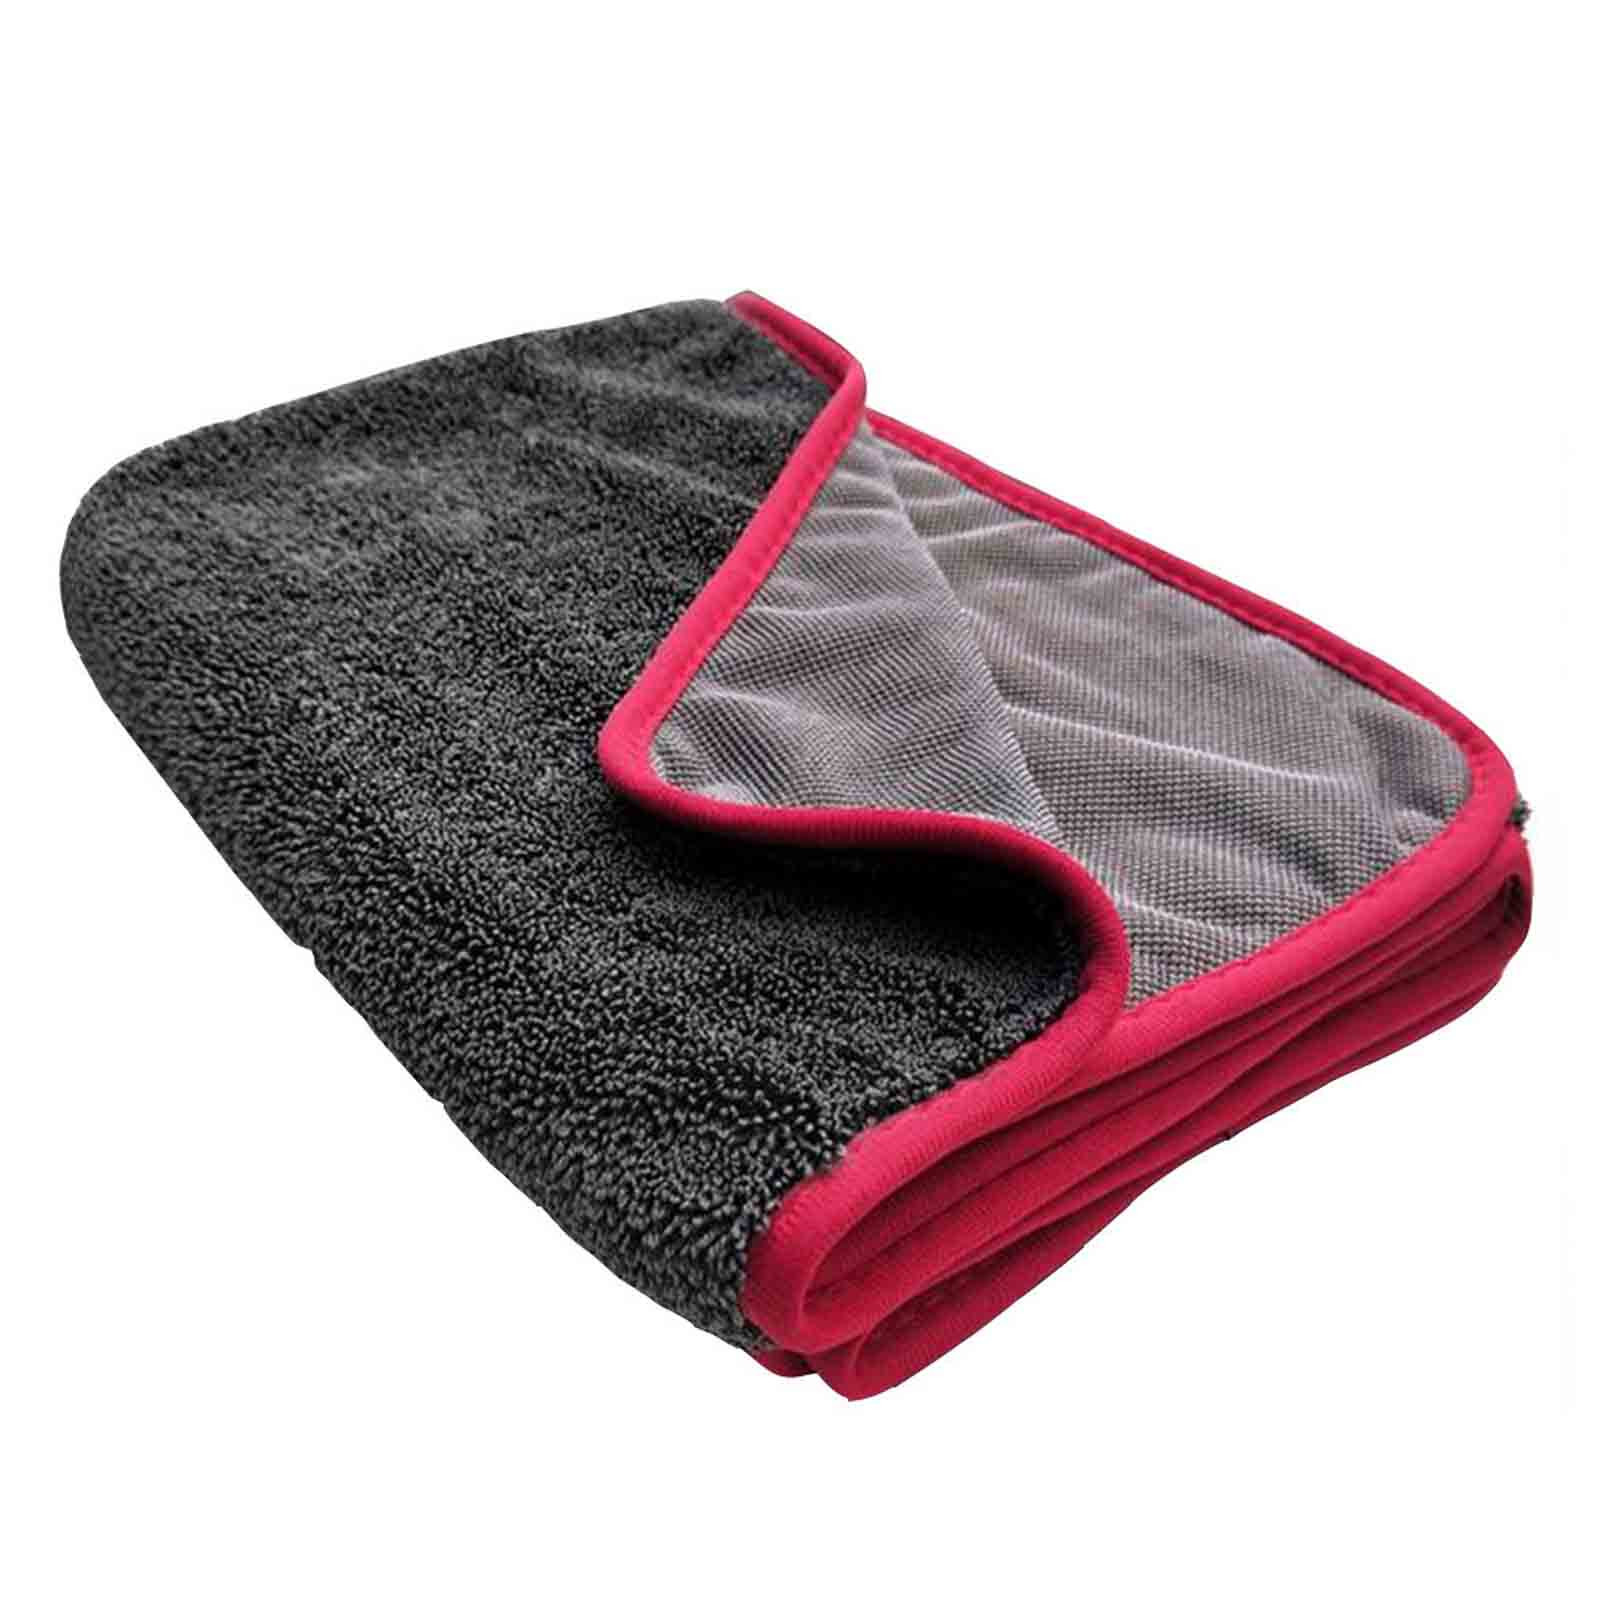 Tepsmf Professional Microfiber Drying Towel, Premium Car Drying Towel with Silk Edge, Super Absorbent & Scratch-Free, Drying Towel for Cars, SUVs, RVs